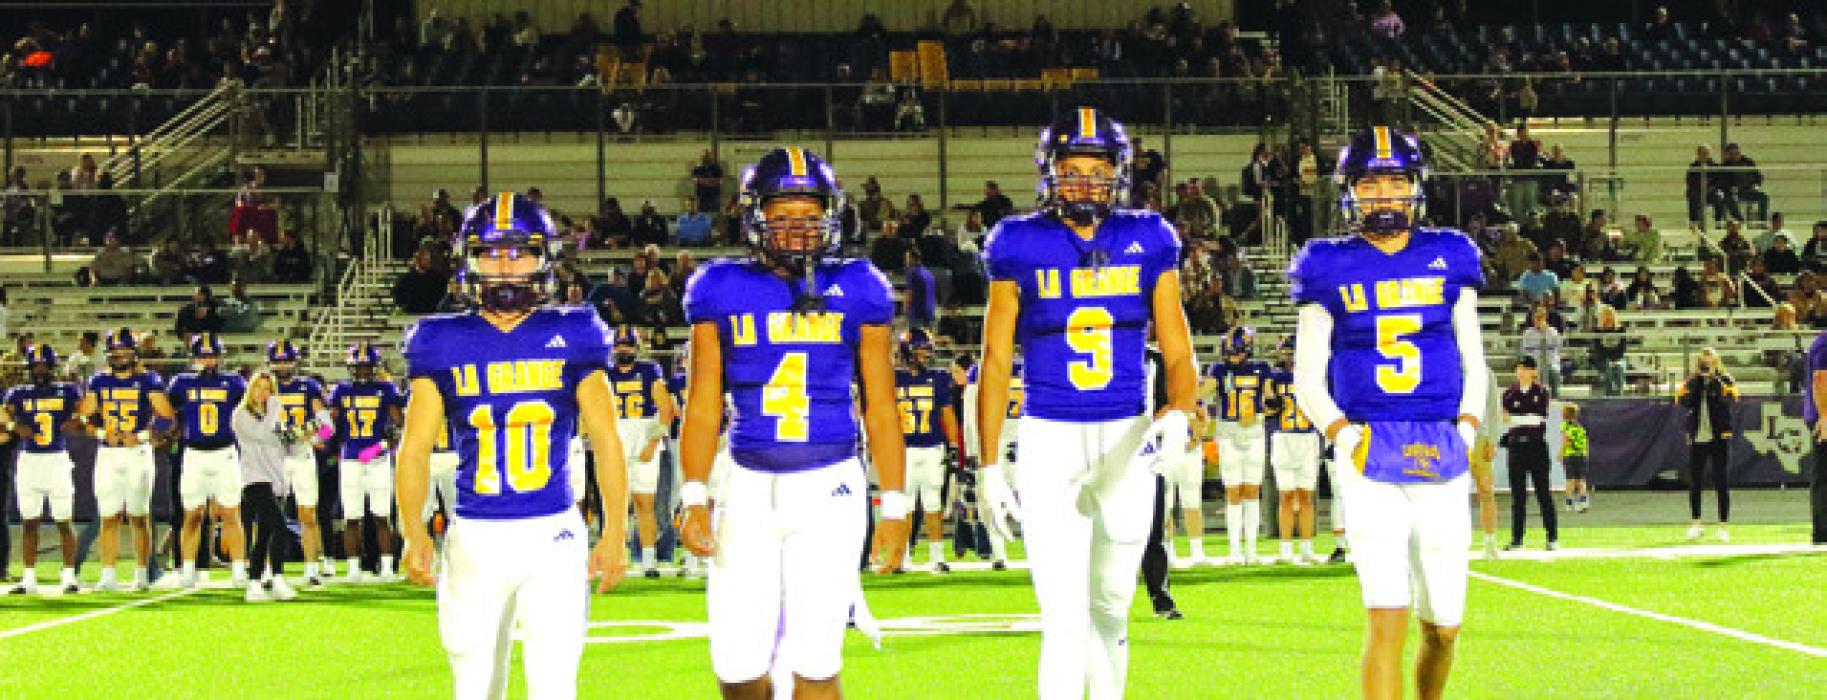 The La Grange captains walk out for the coin toss before Friday’s game. Photo by Darrell D. Gest